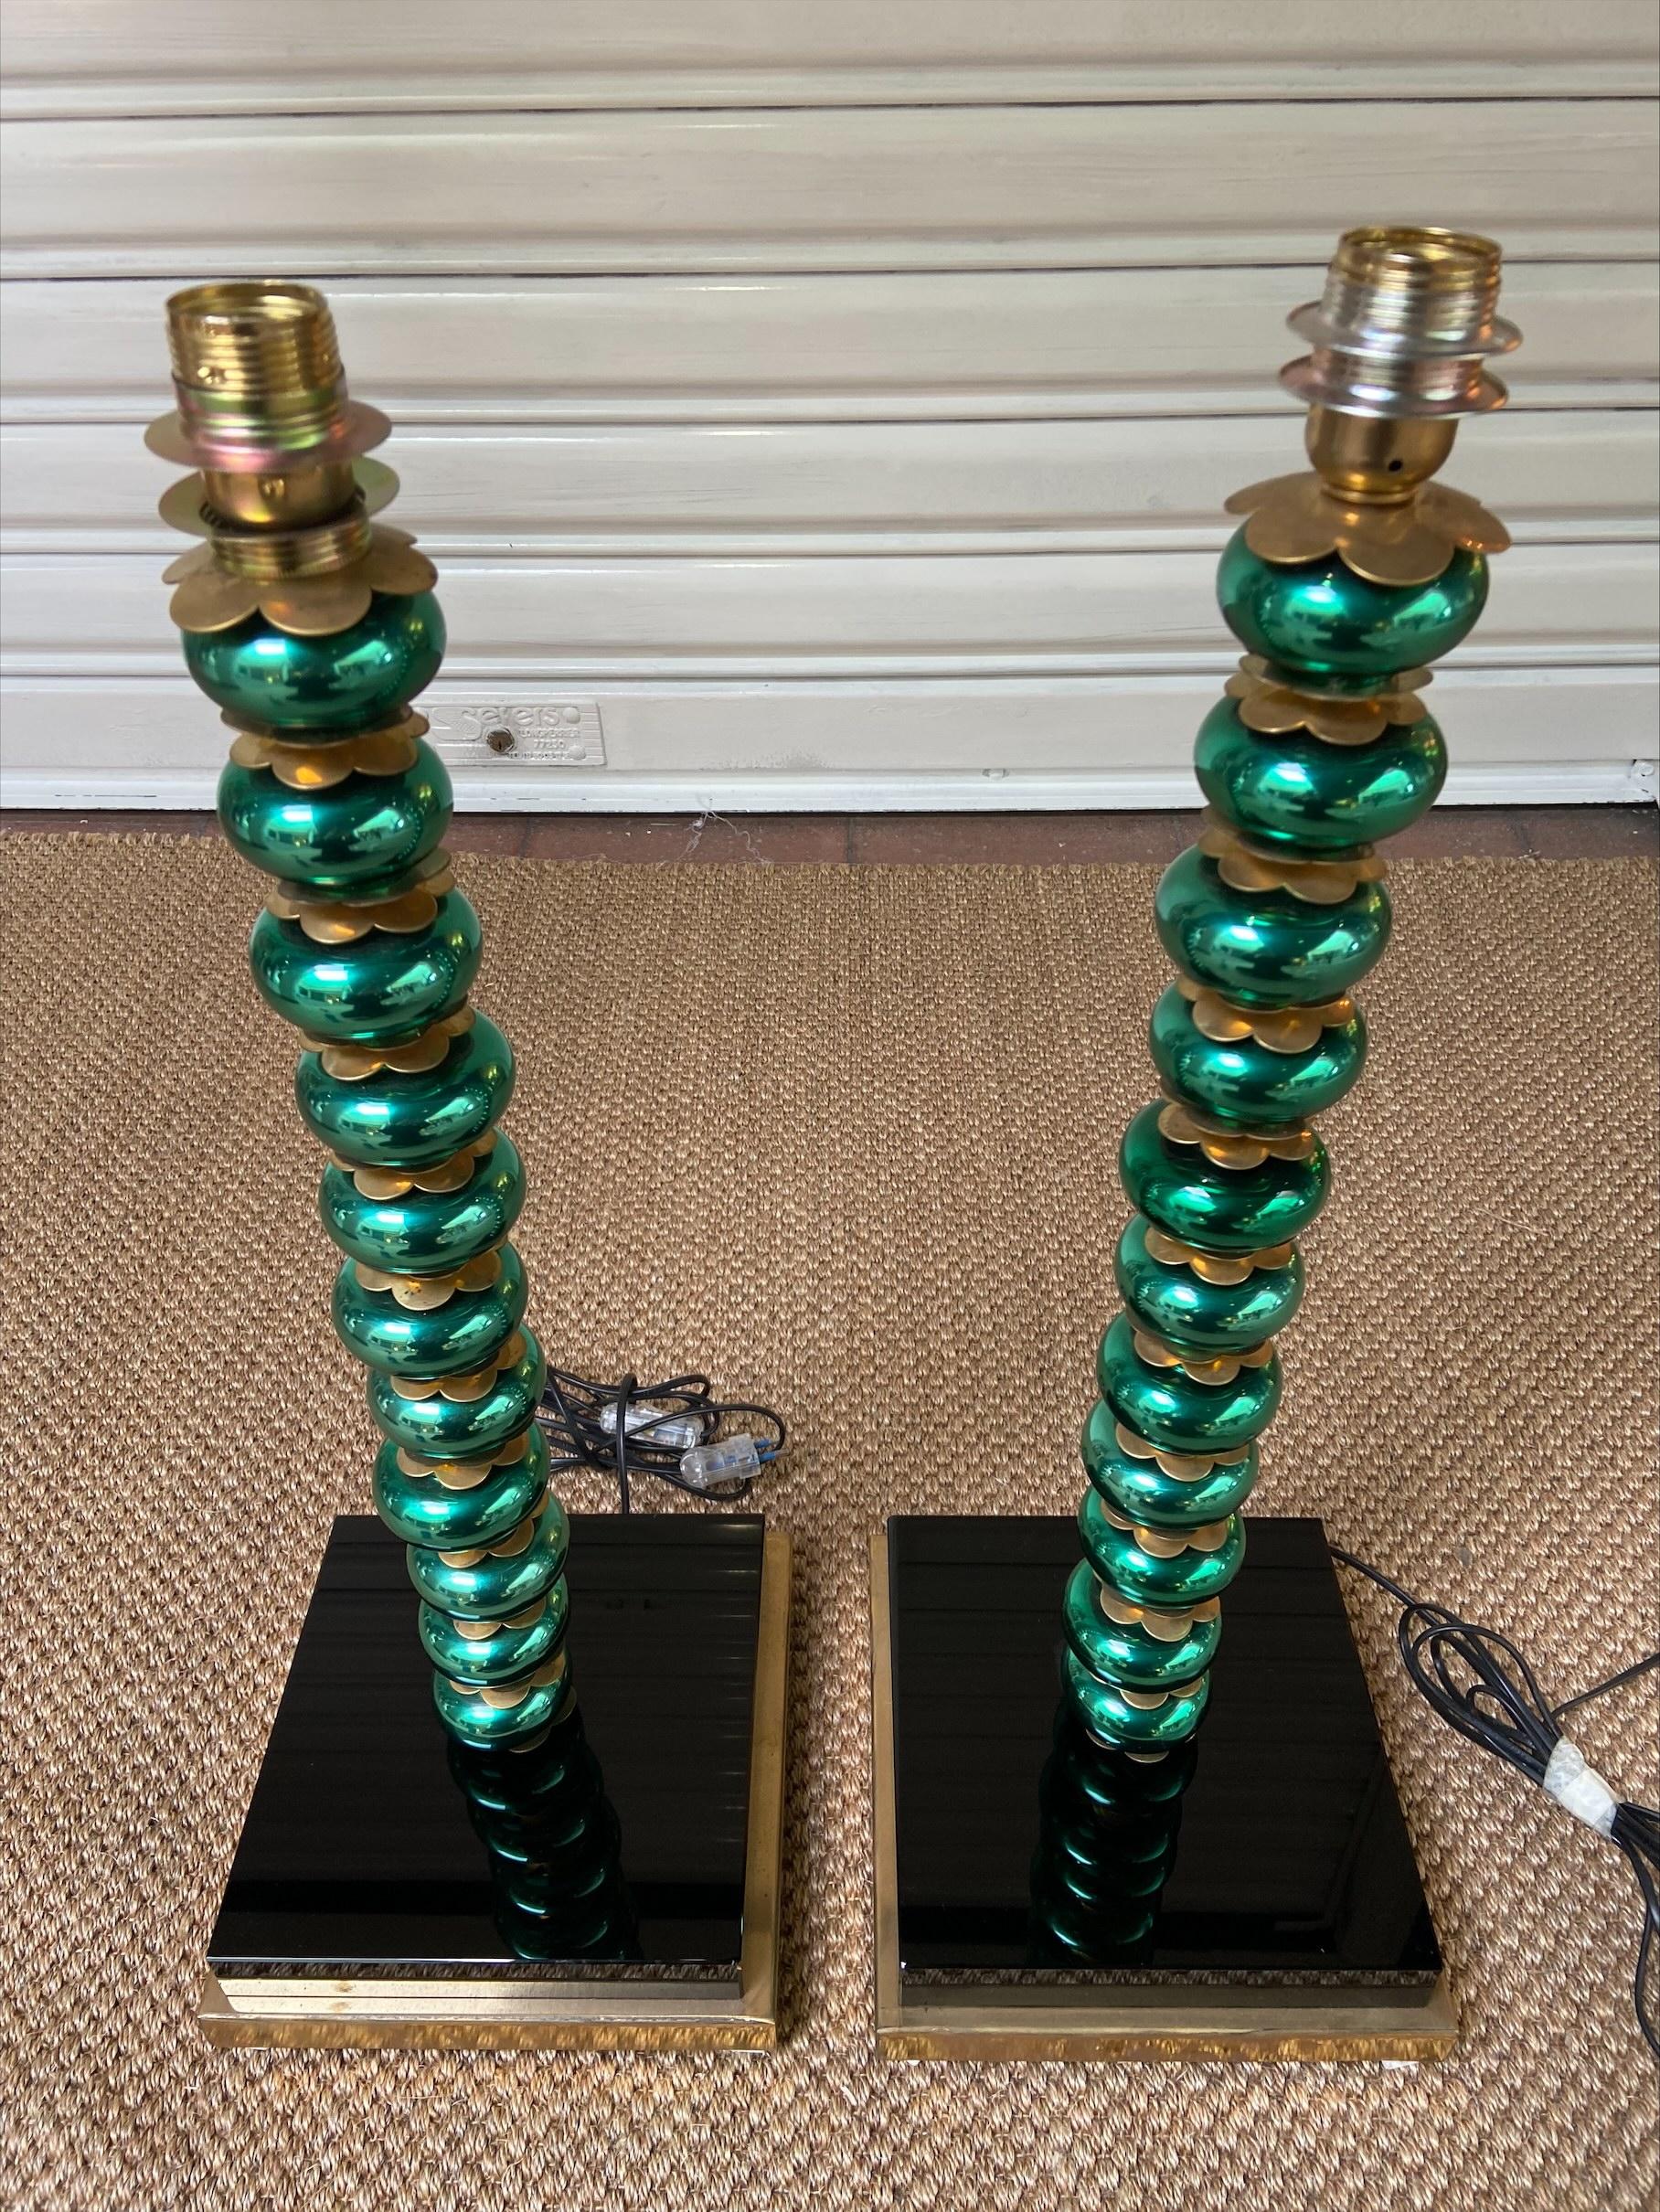 Pair of green Murano table lamps, 1980
Italy
Murano glass, brass and mirror

Measures: H 70 x L25 x P25 cm.
     